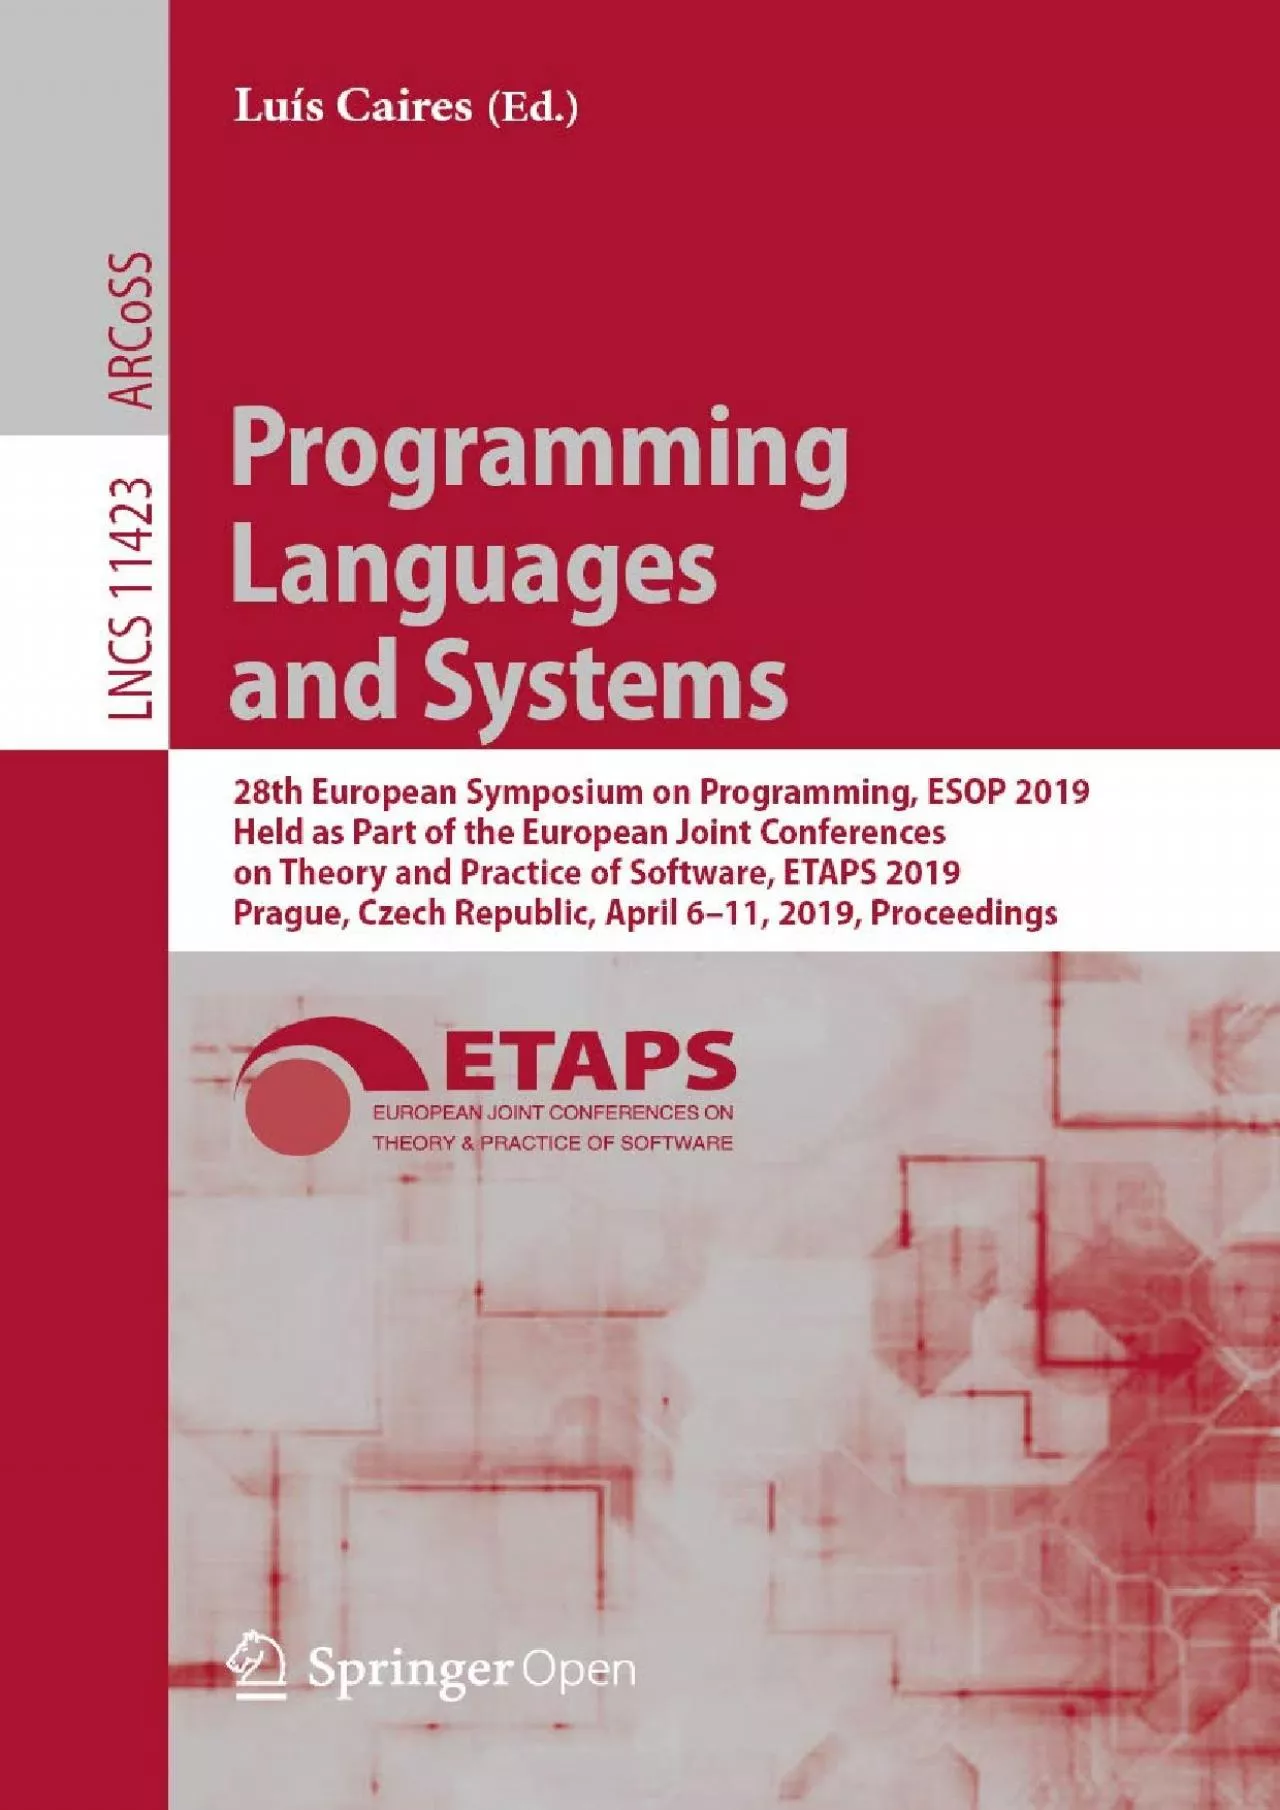 [BEST]-Programming Languages and Systems: 28th European Symposium on Programming, ESOP